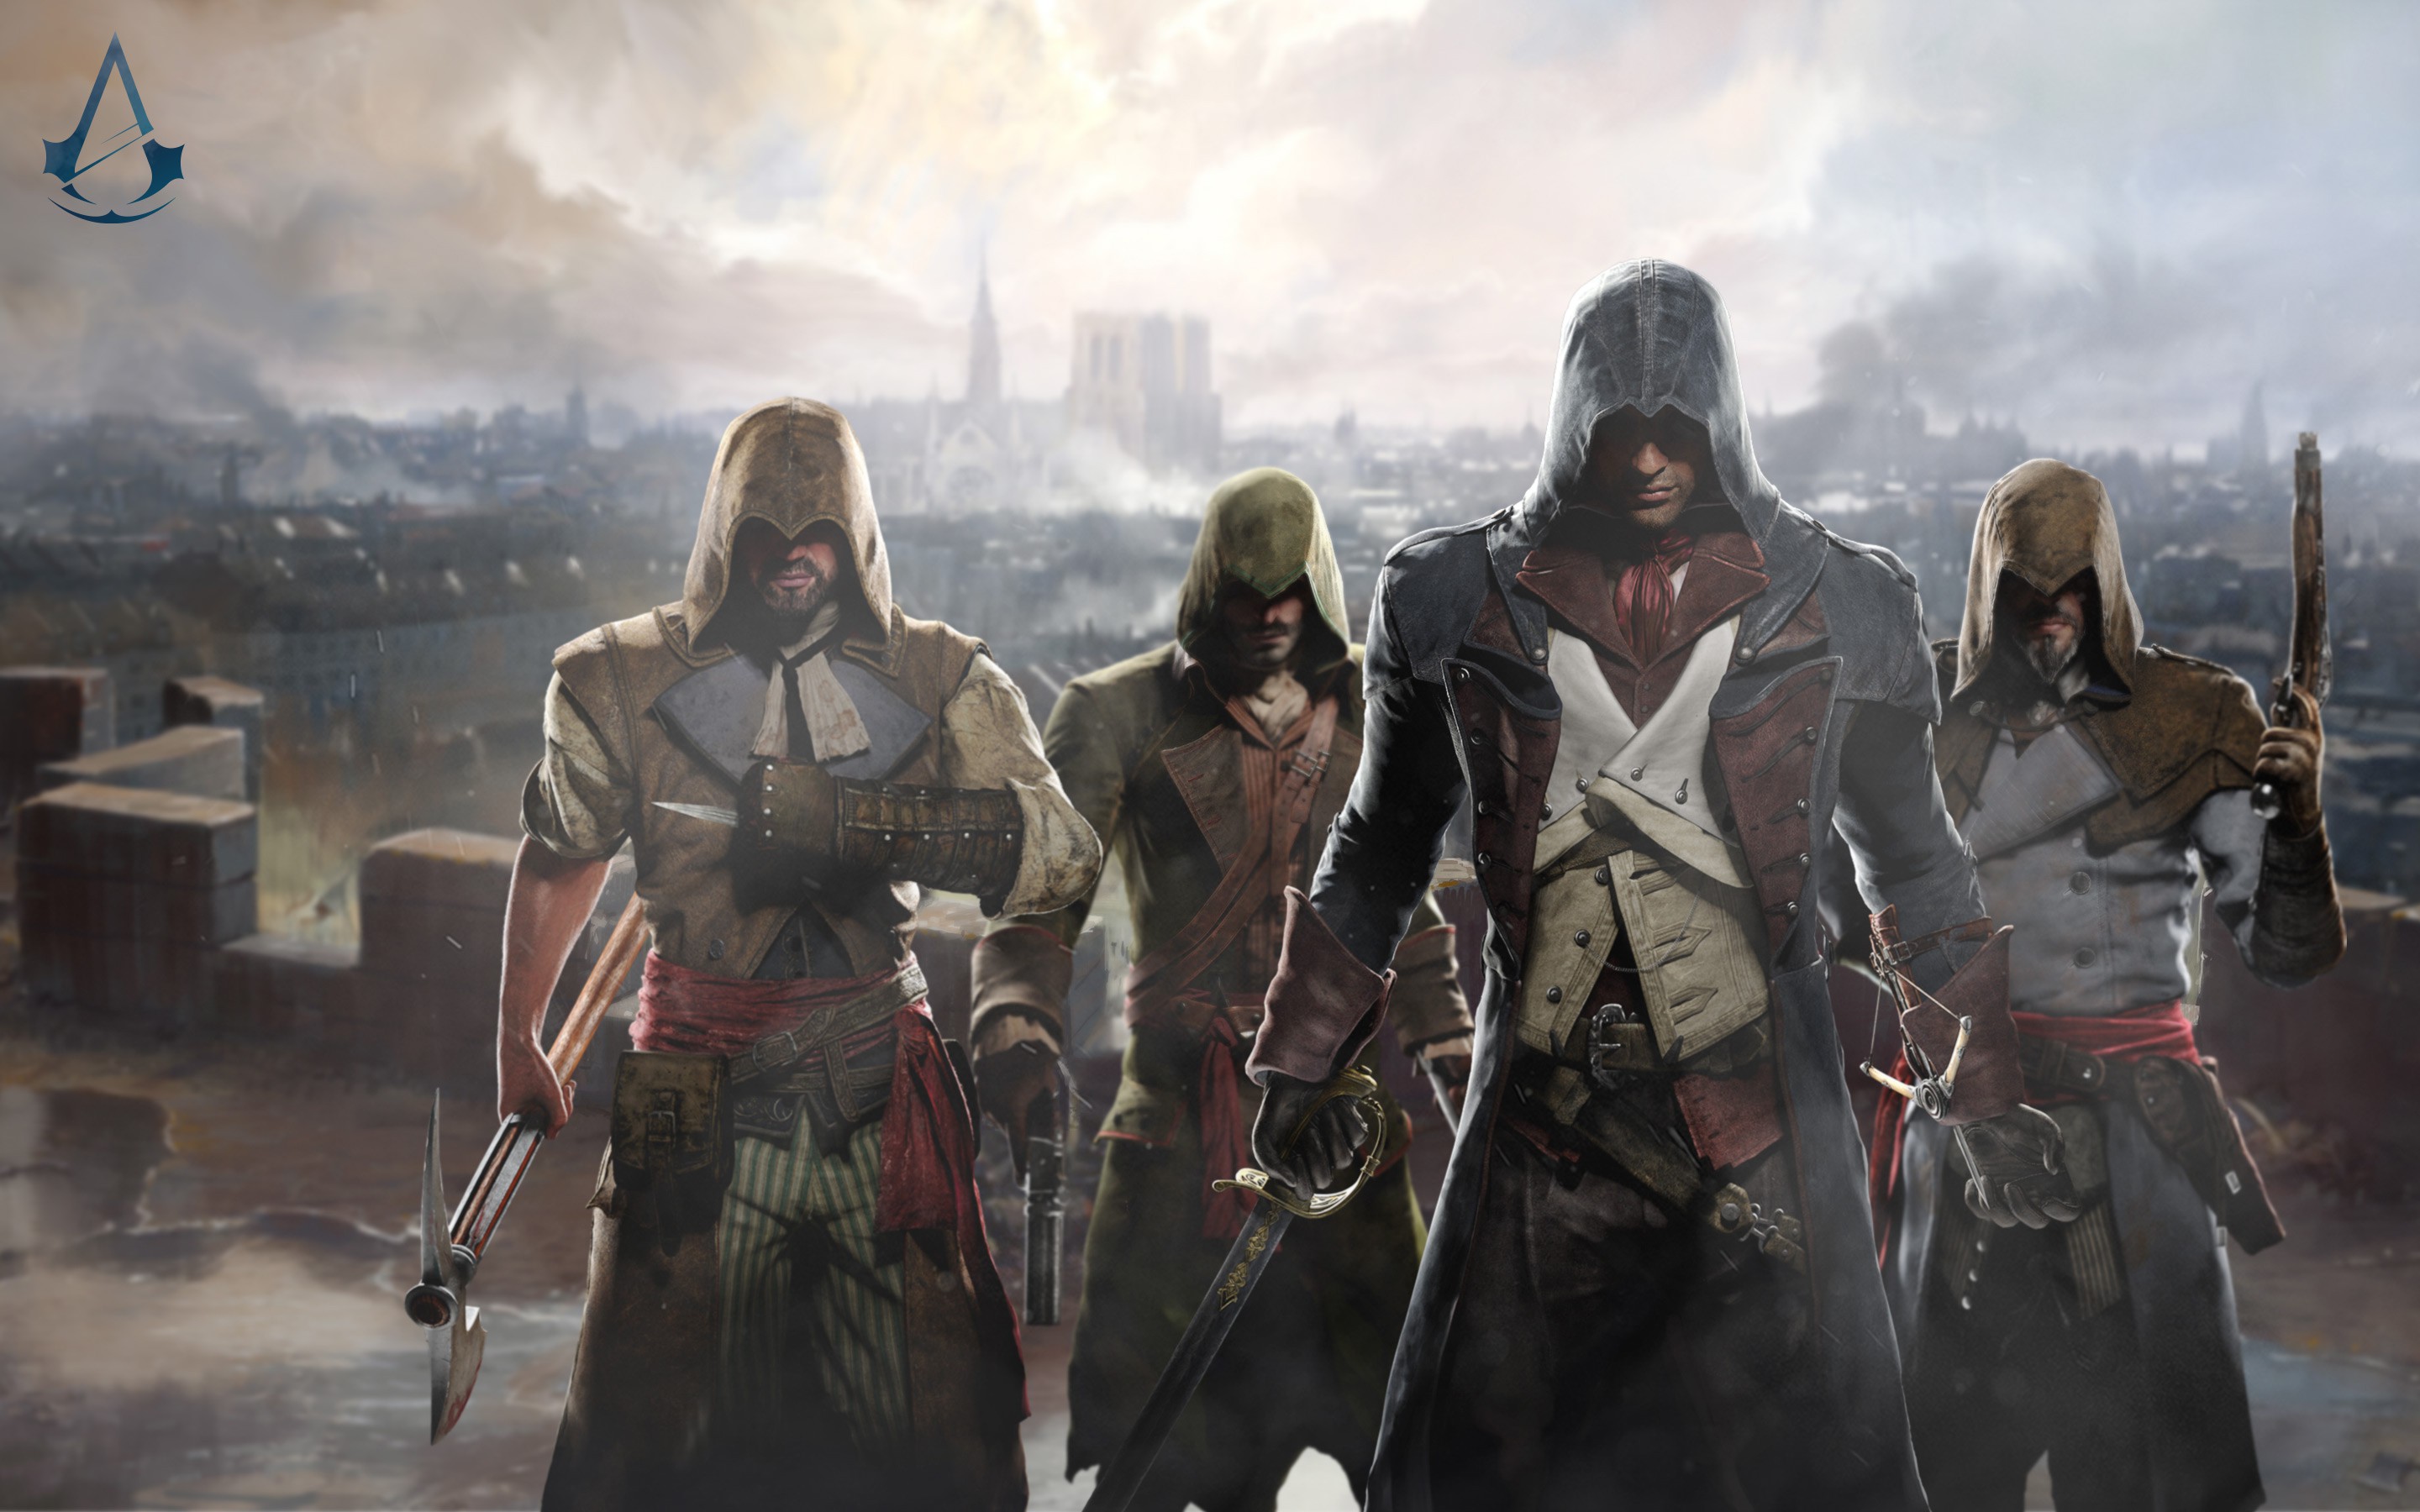 Download wallpaper 750x1334 art of assassin assassins creed unity iphone  7 iphone 8 750x1334 hd background 17712